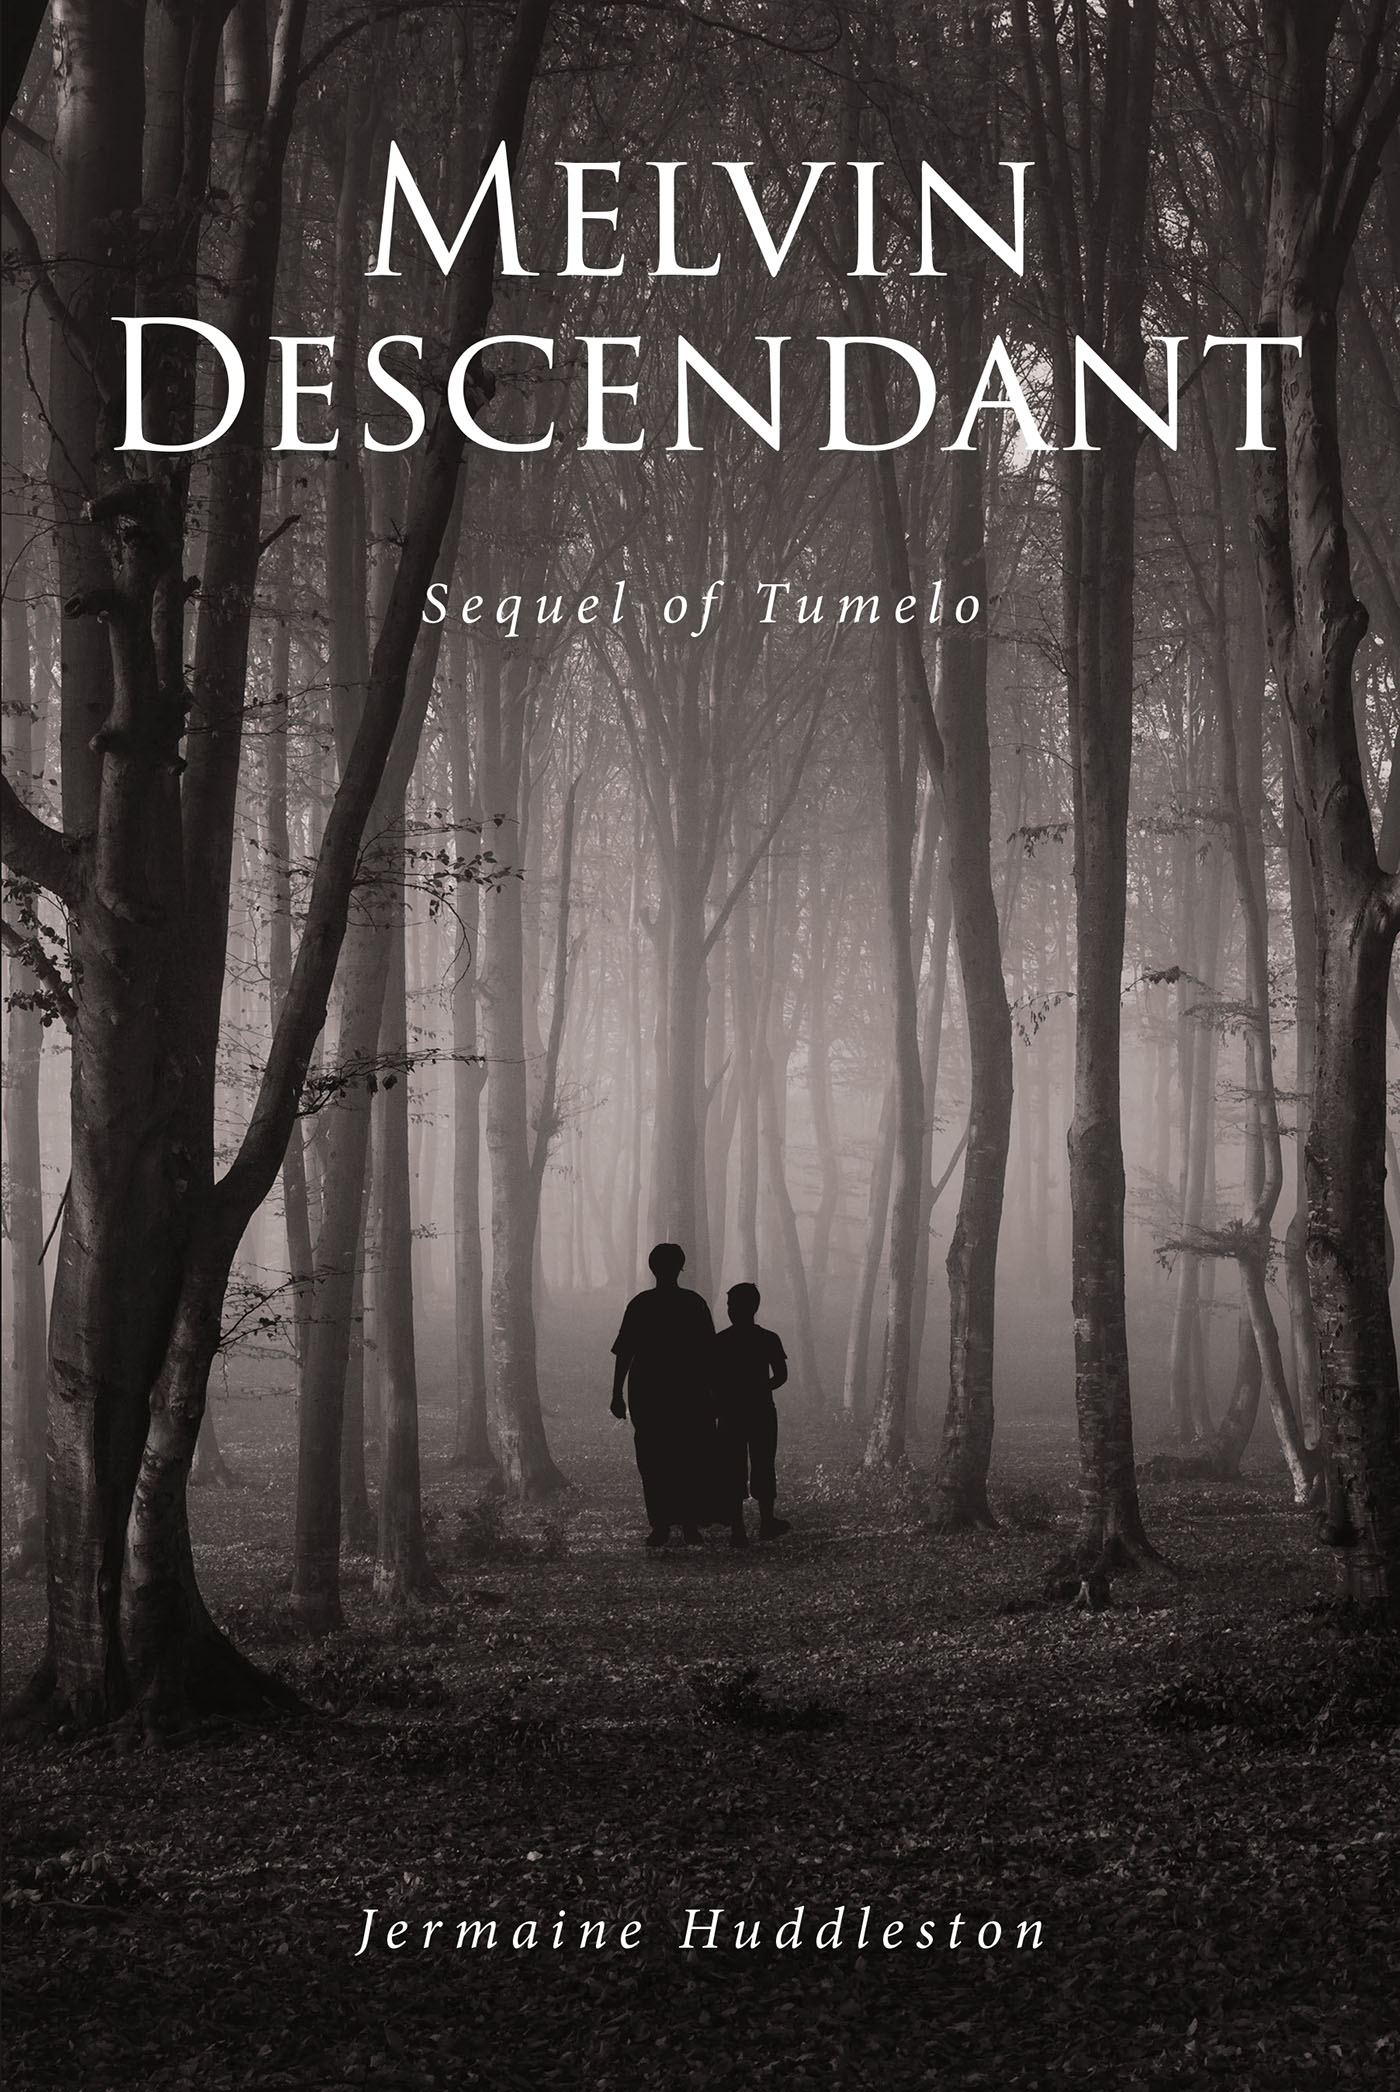 Jermaine Huddleston’s New Book, "Melvin Descendant: Sequel of Tumelo," Follows a Young Man Who Must Overcome His Personal Trials as Well as the Challenges of Society